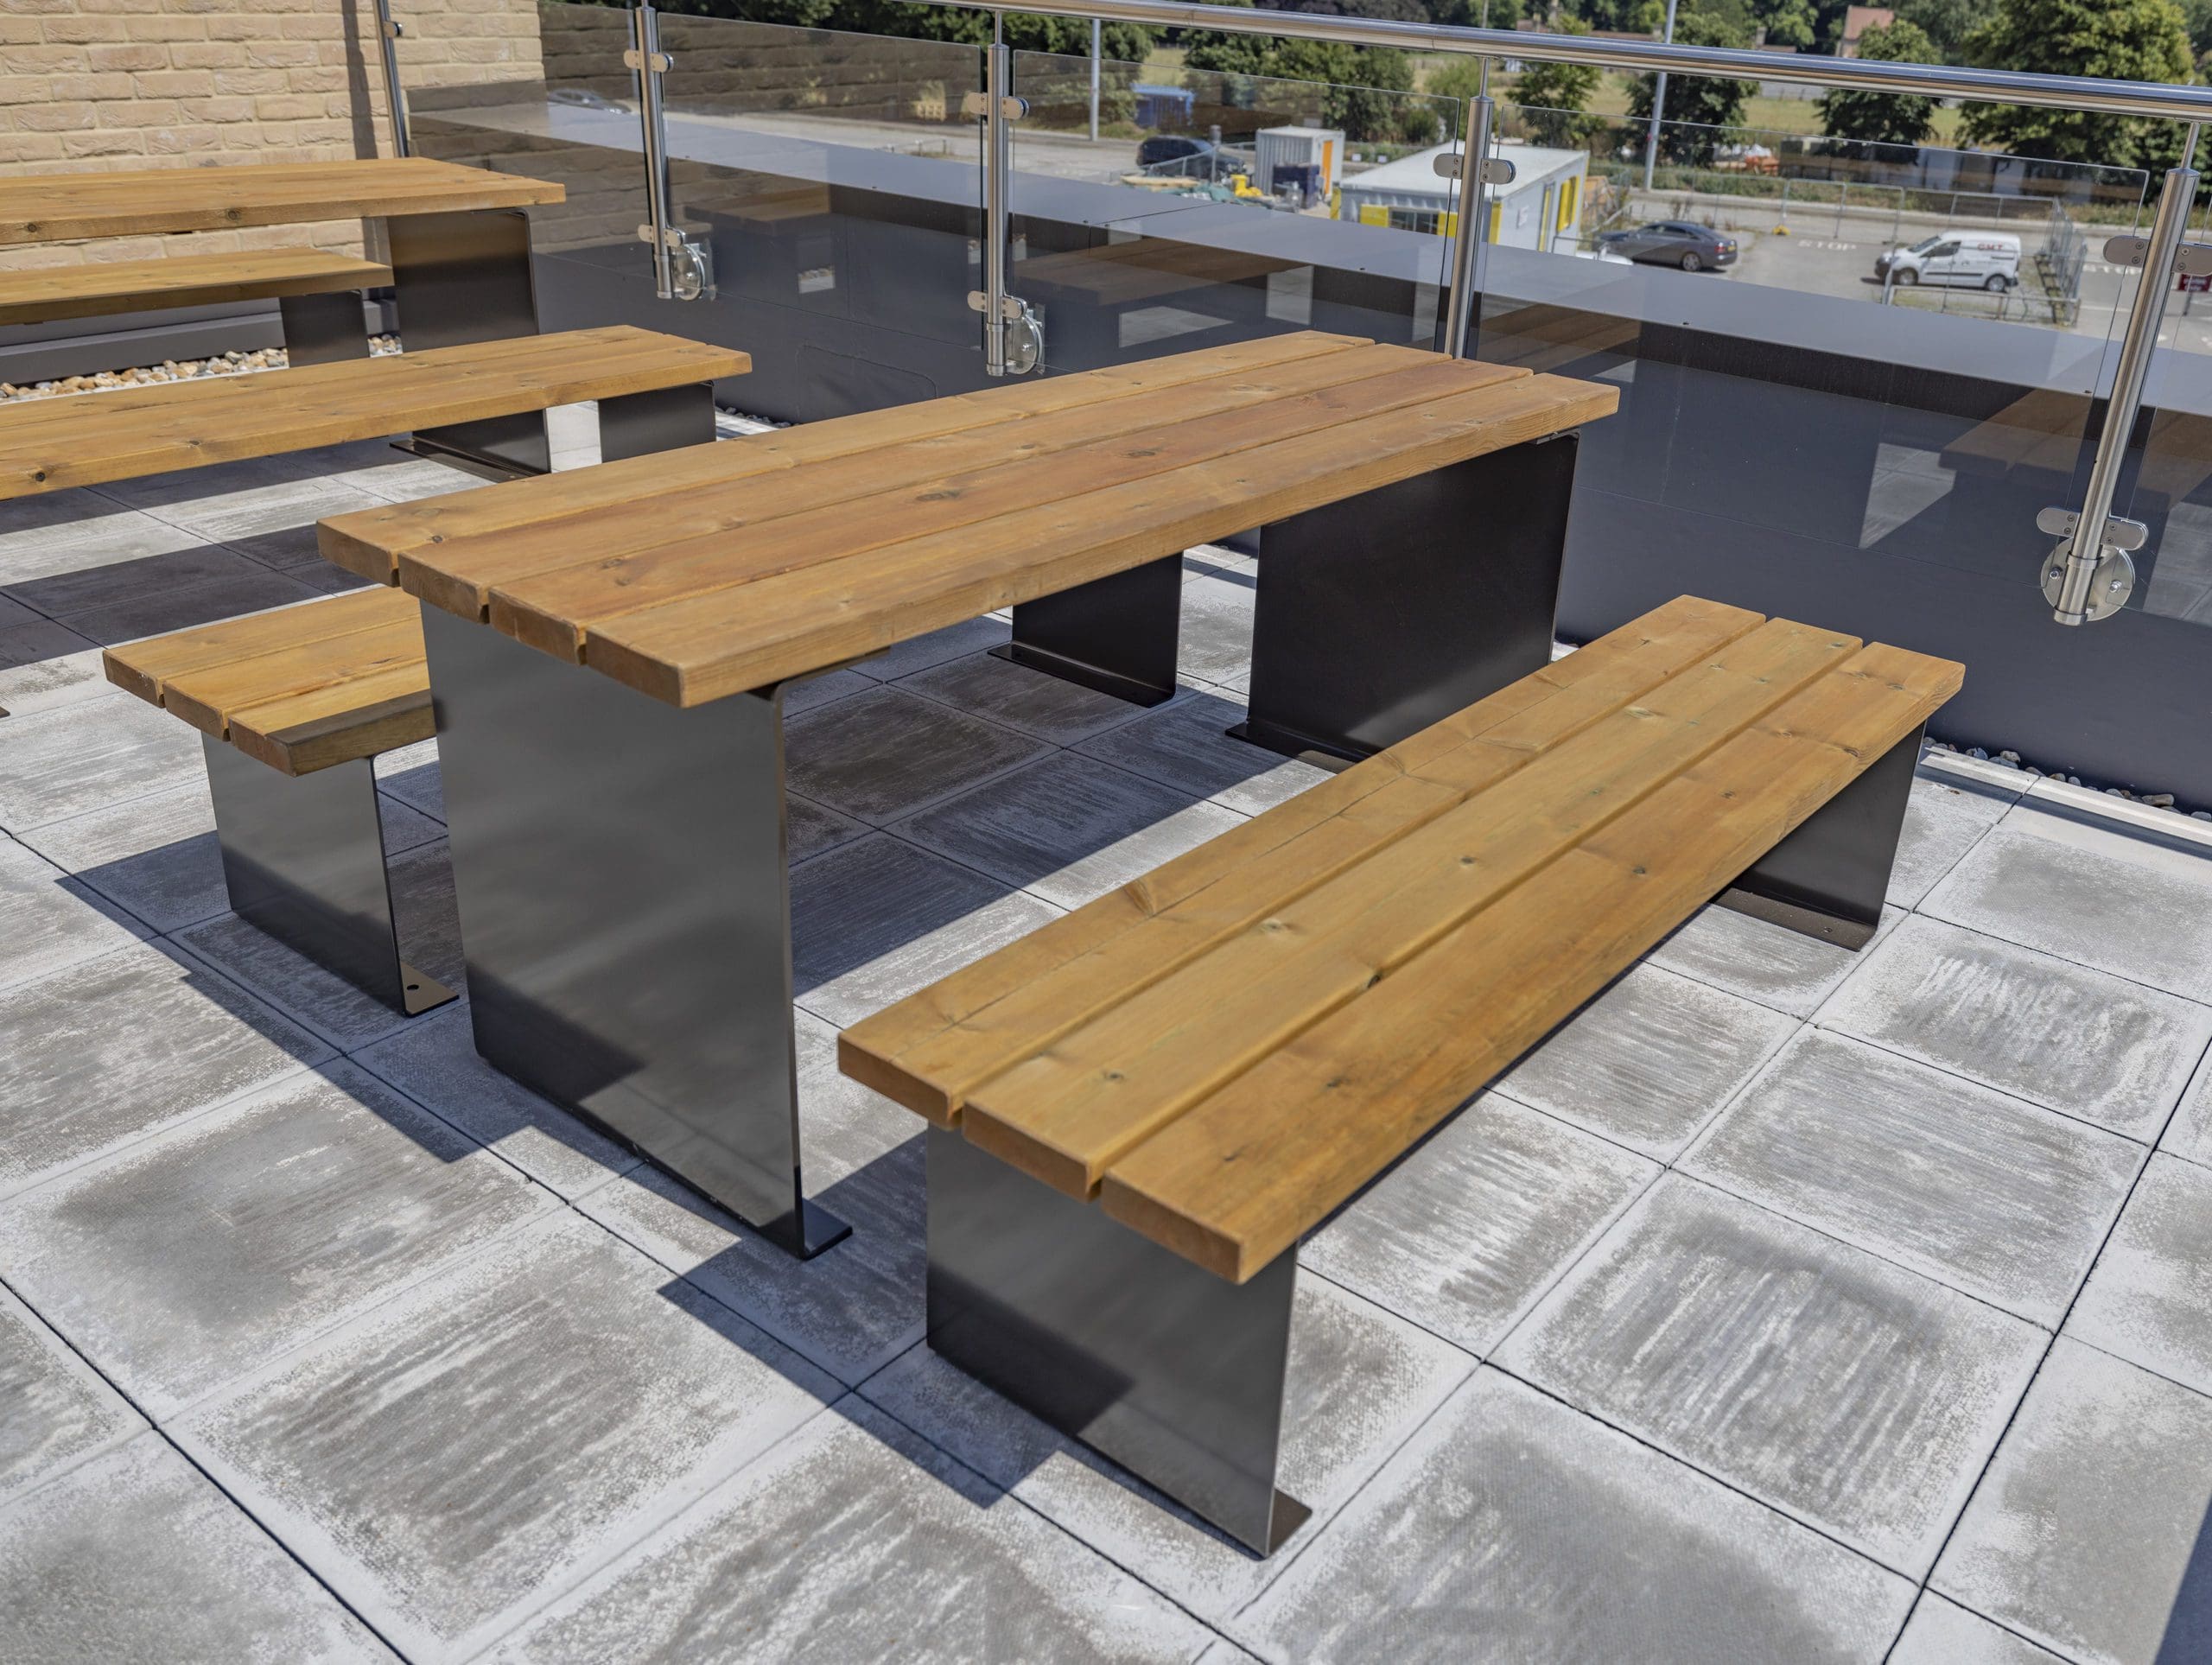 exterior-wooden-table-with-benches-black-metal-legs